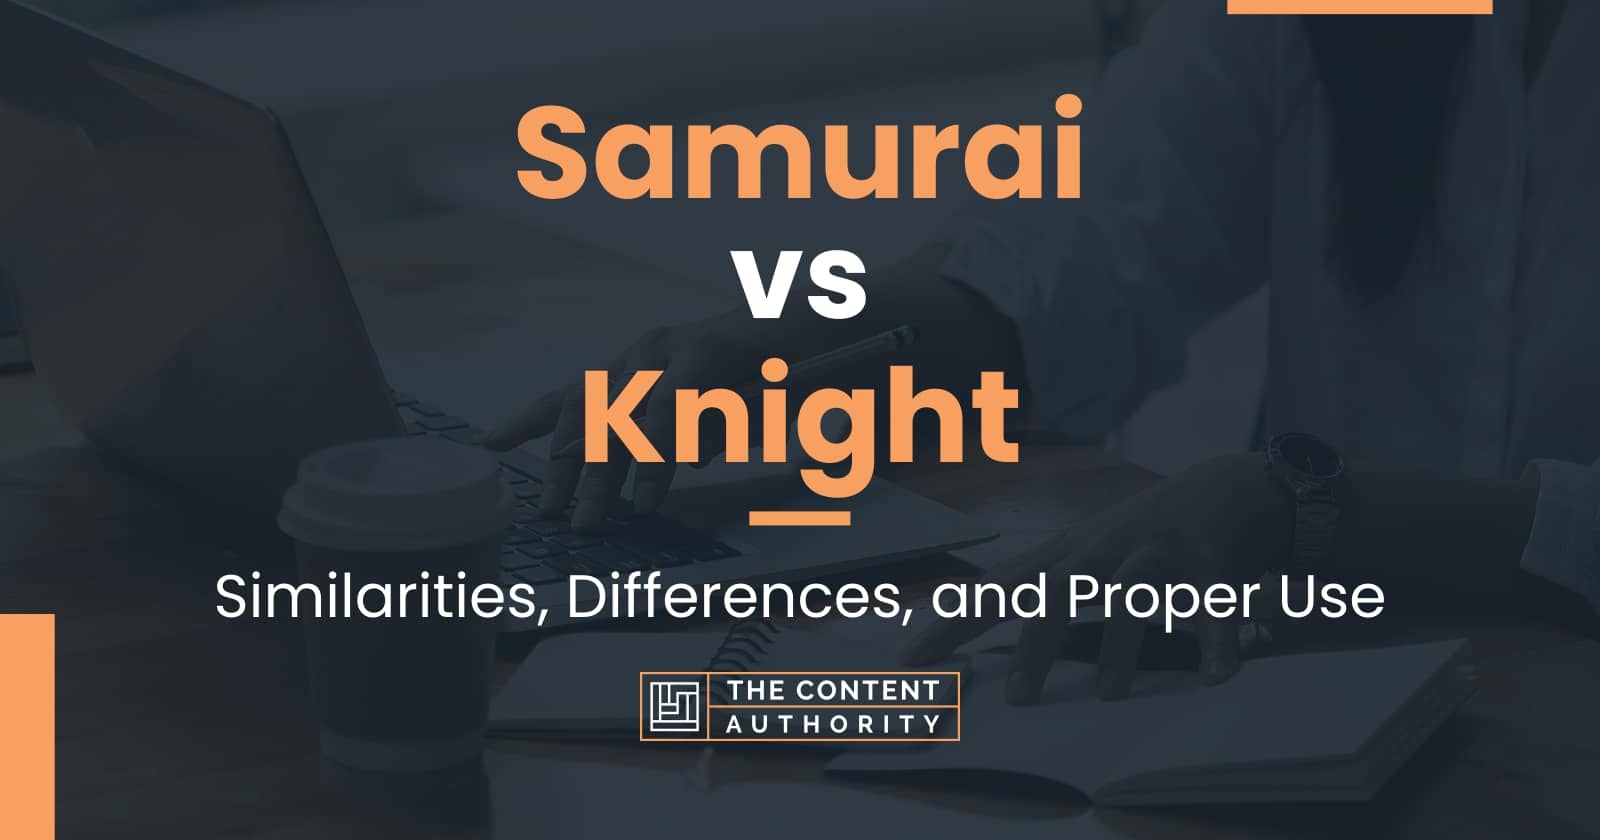 samurai and knights similarities and differences dbq essay